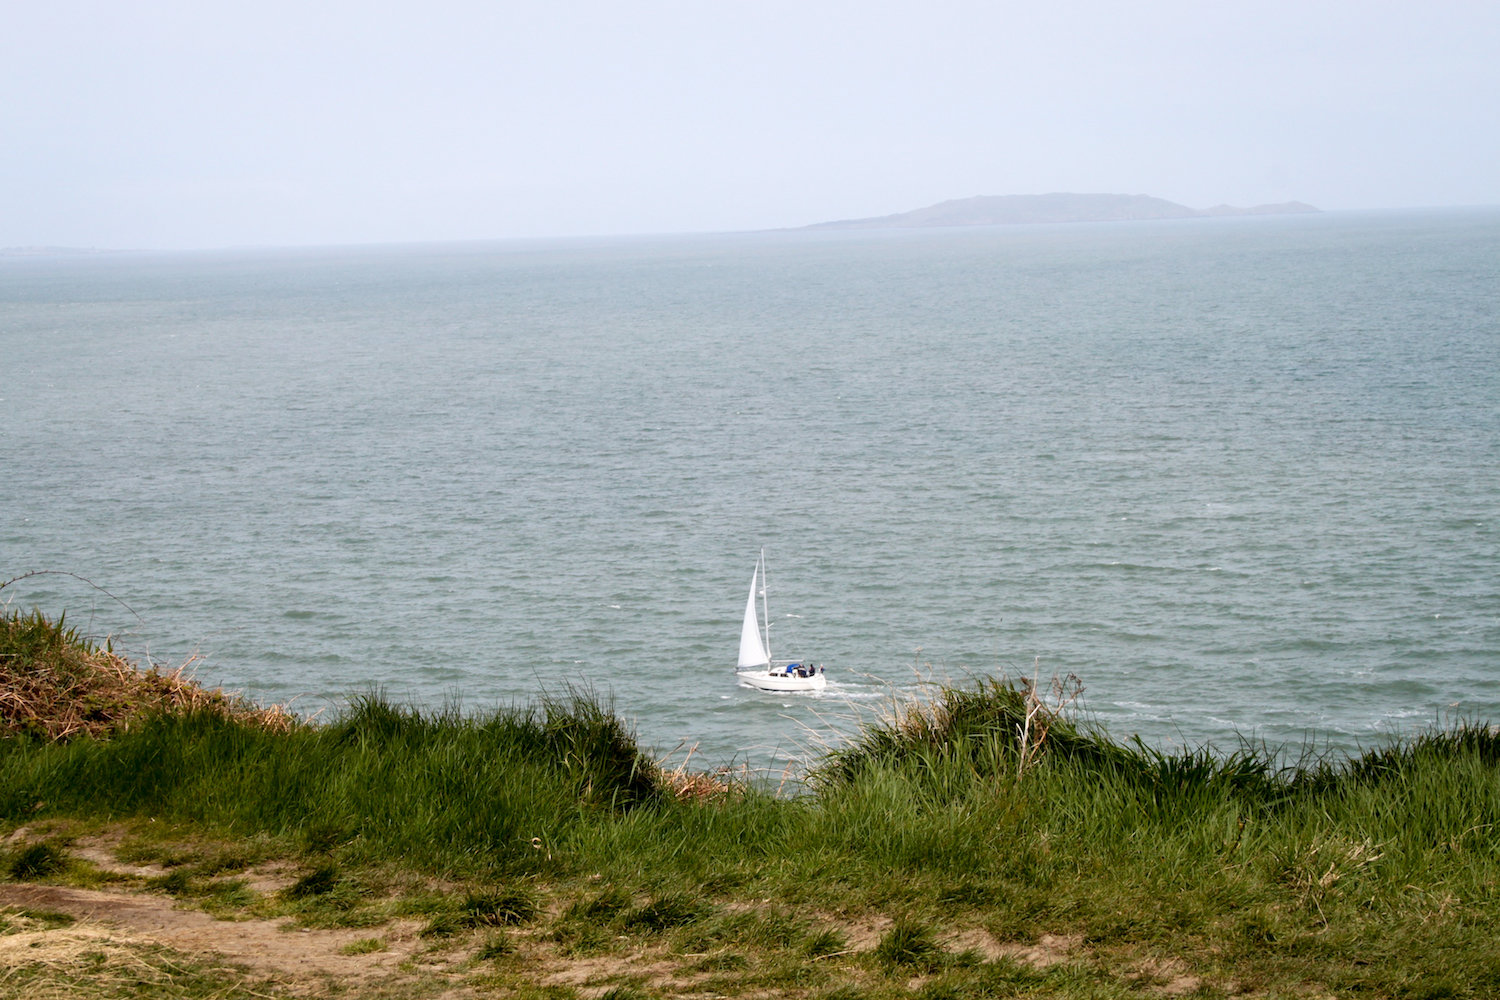 A sailboat in Howth, Ireland (Eat Me. Drink Me.)